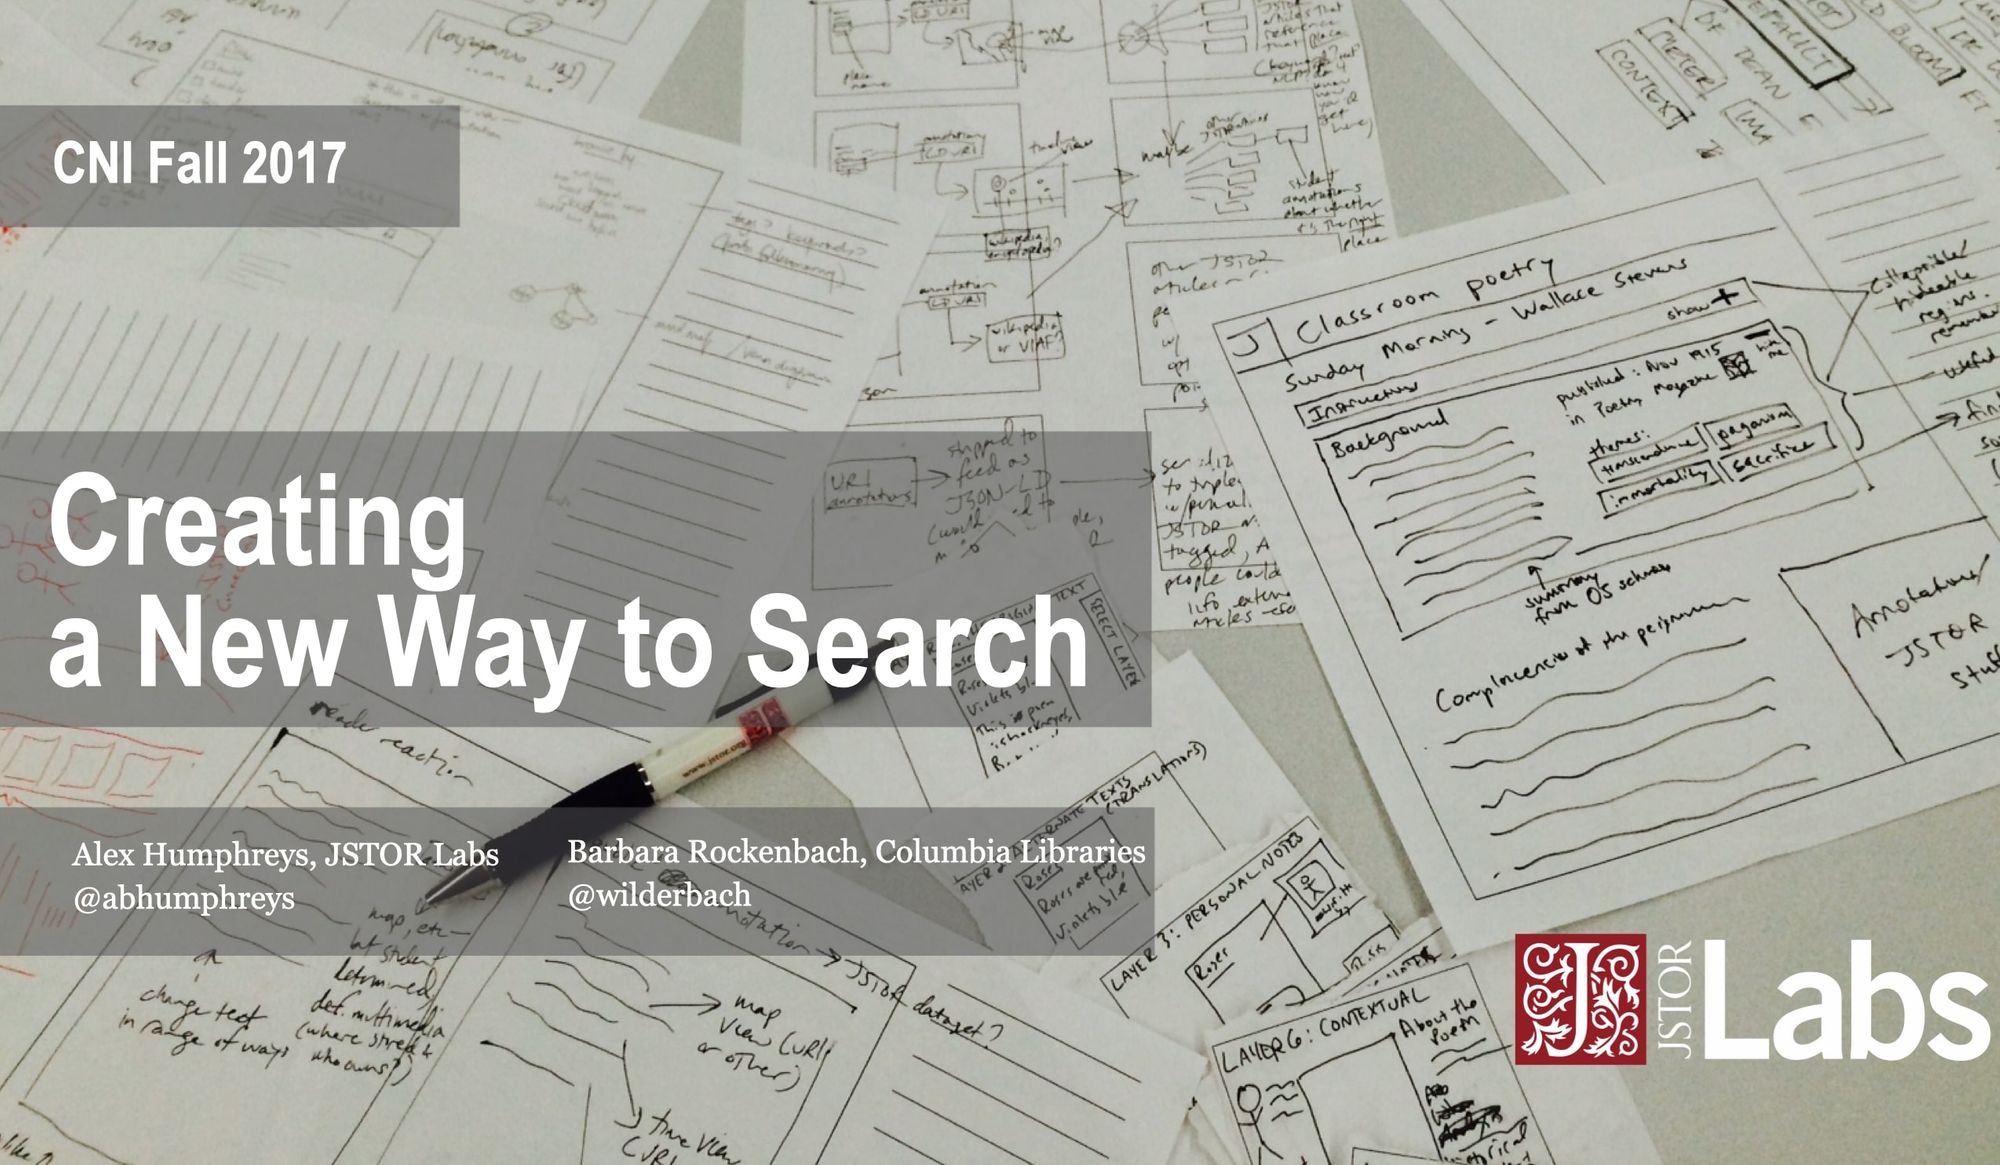 Creating a New Way to Search